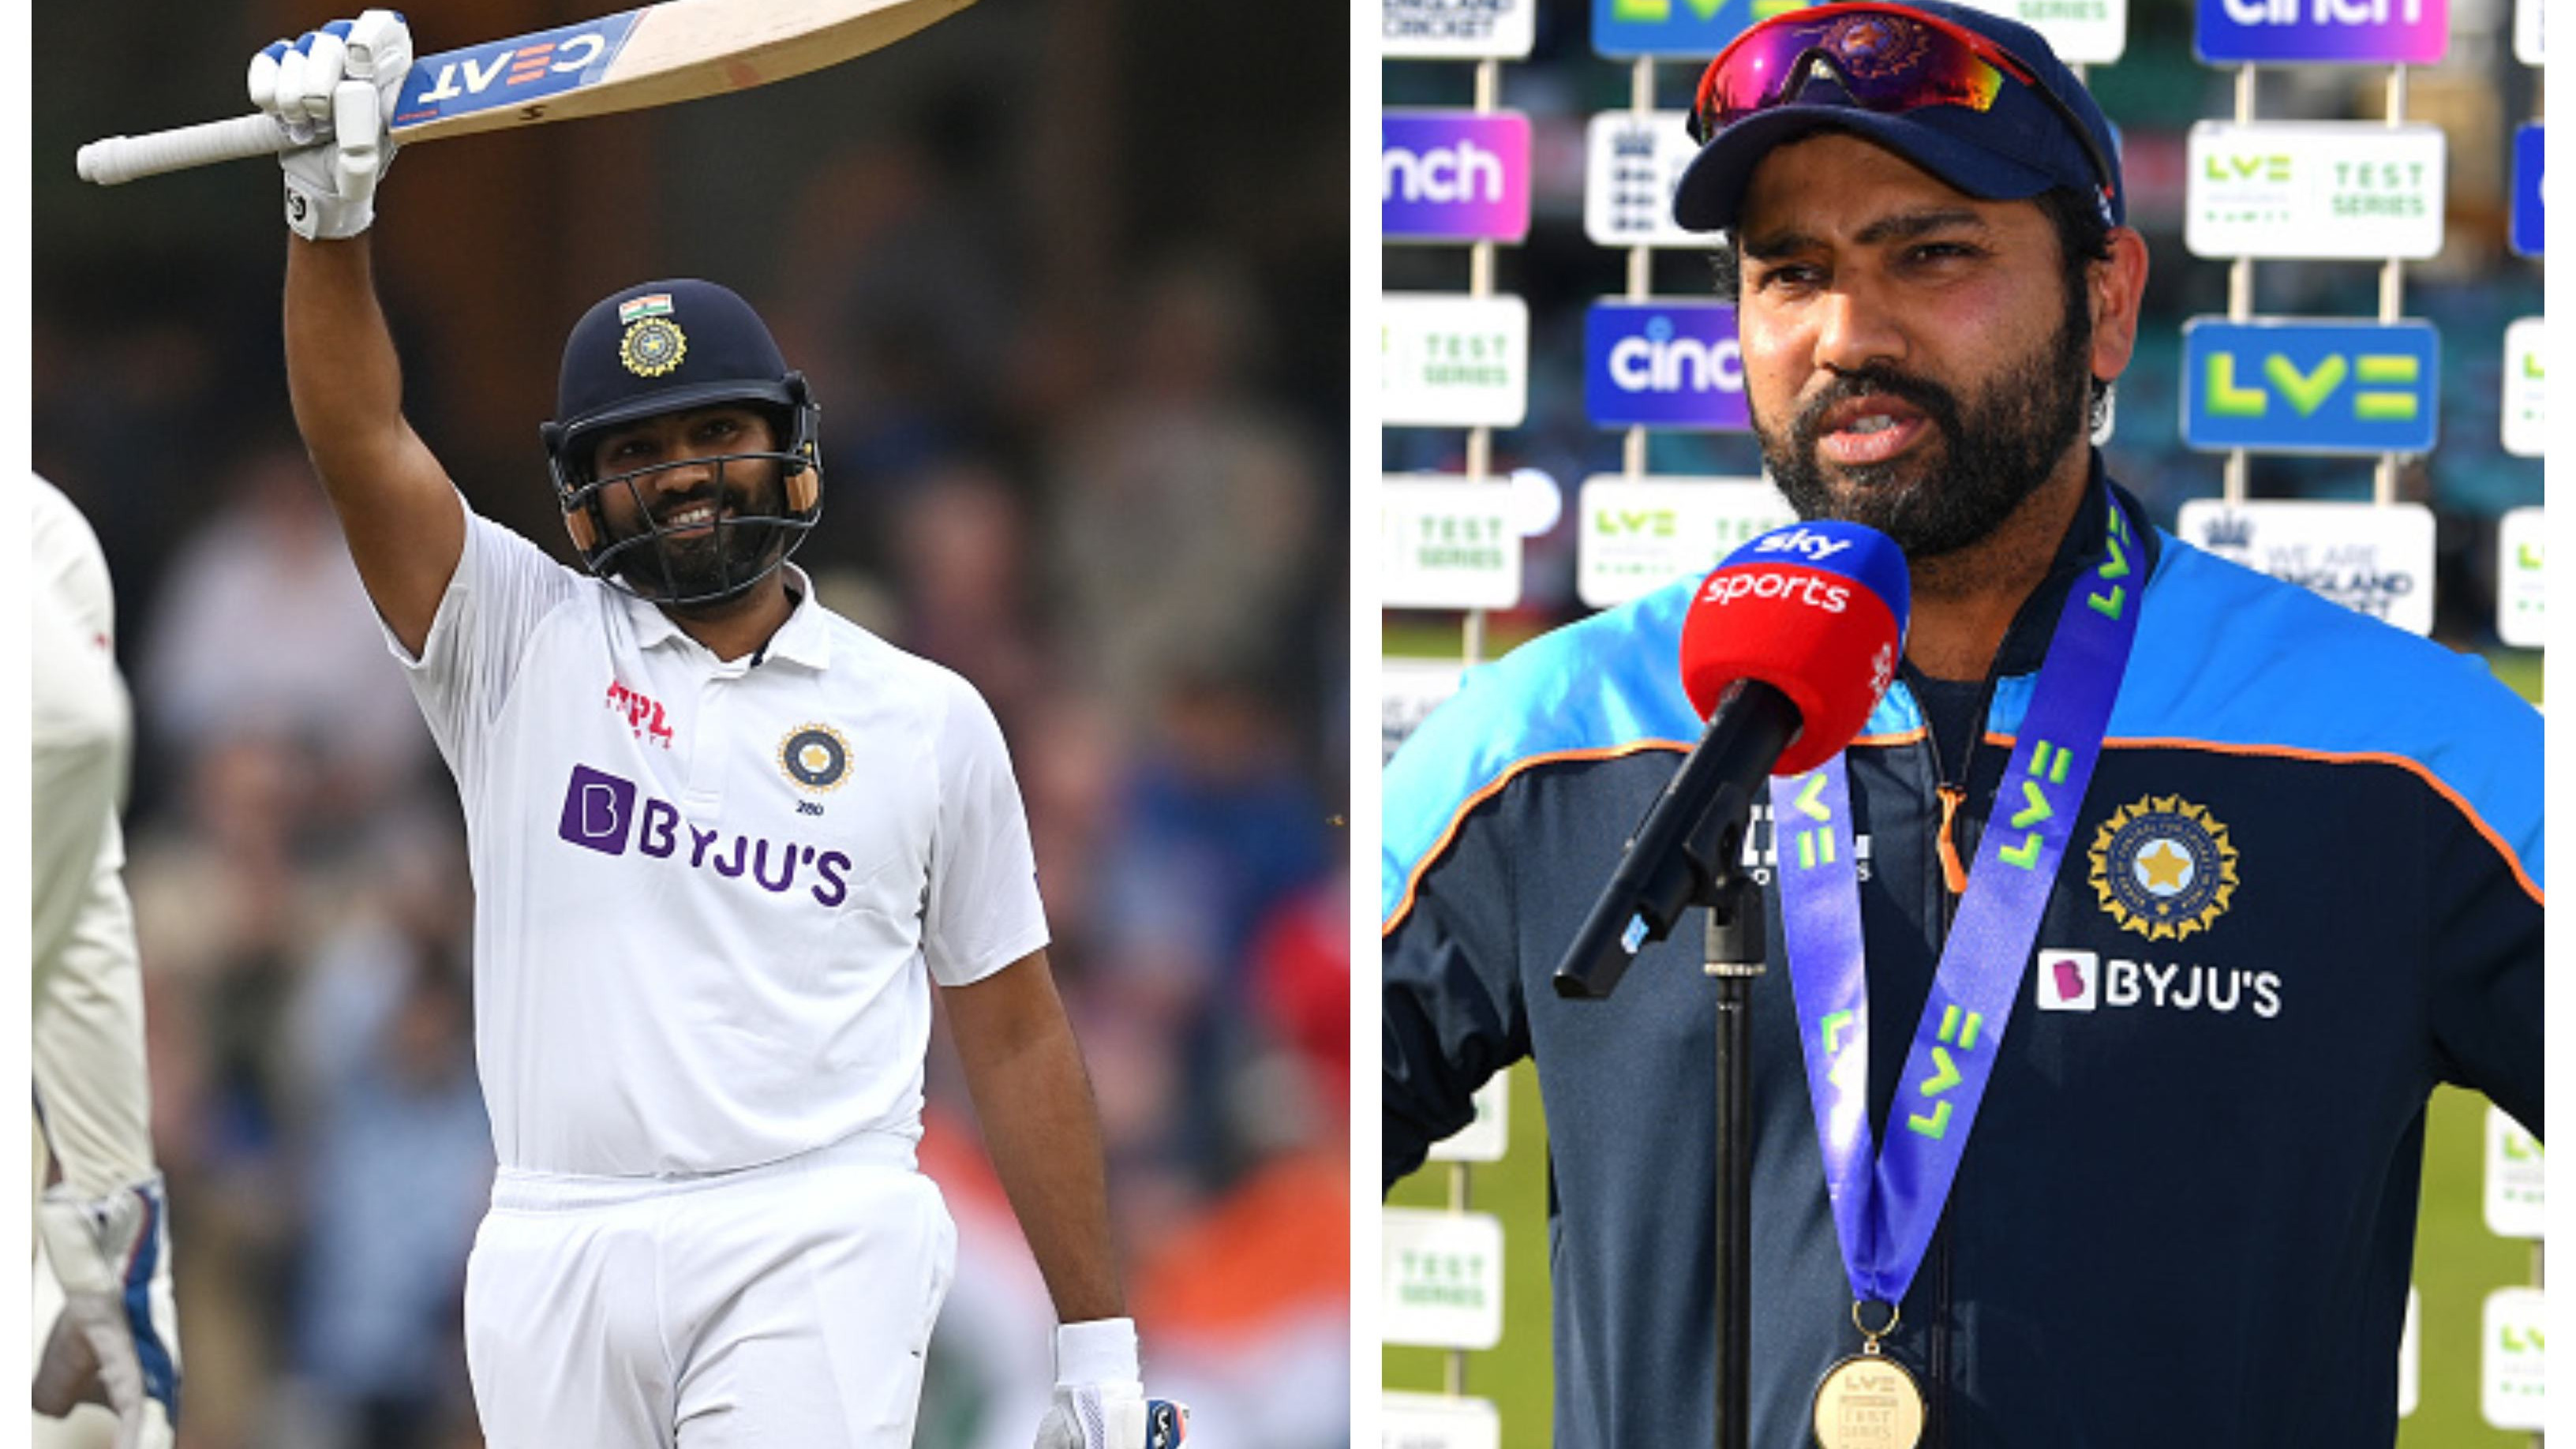 ENG v IND 2021: “That hundred was special”, says Rohit Sharma after India’s thumping victory at the Oval 